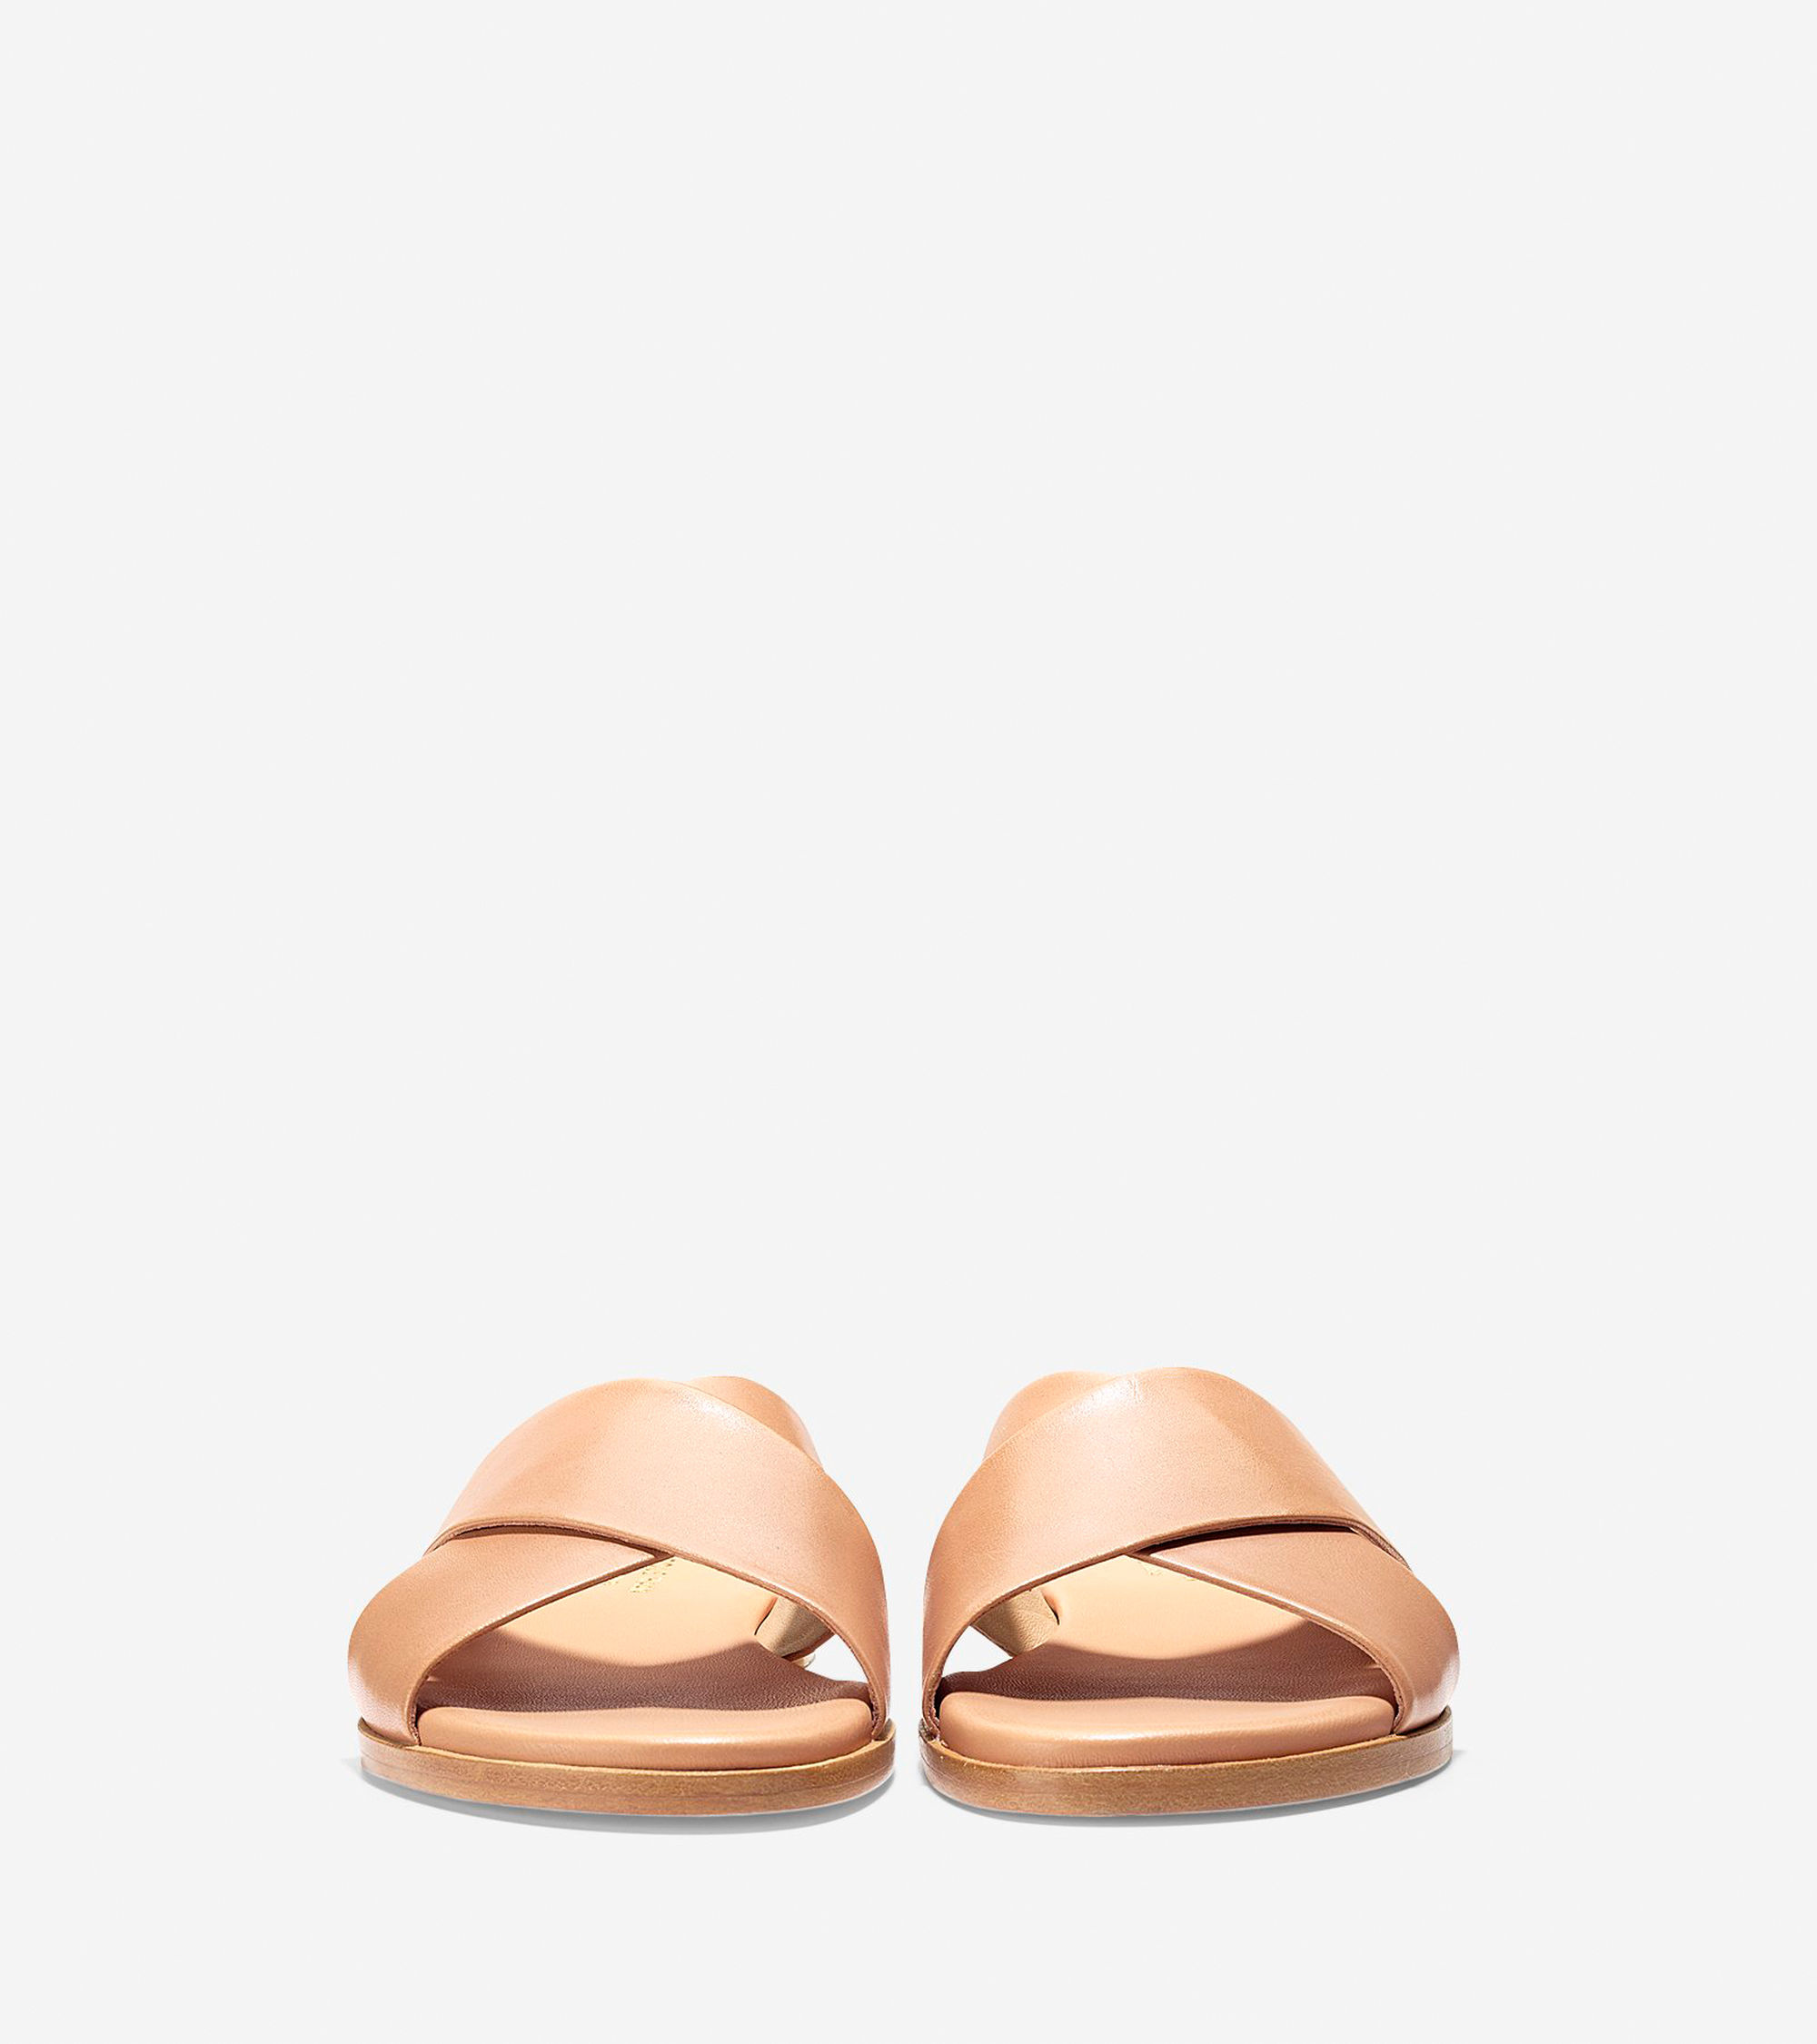 Anica Criss Cross Sandals in Sahara Leather | Cole Haan